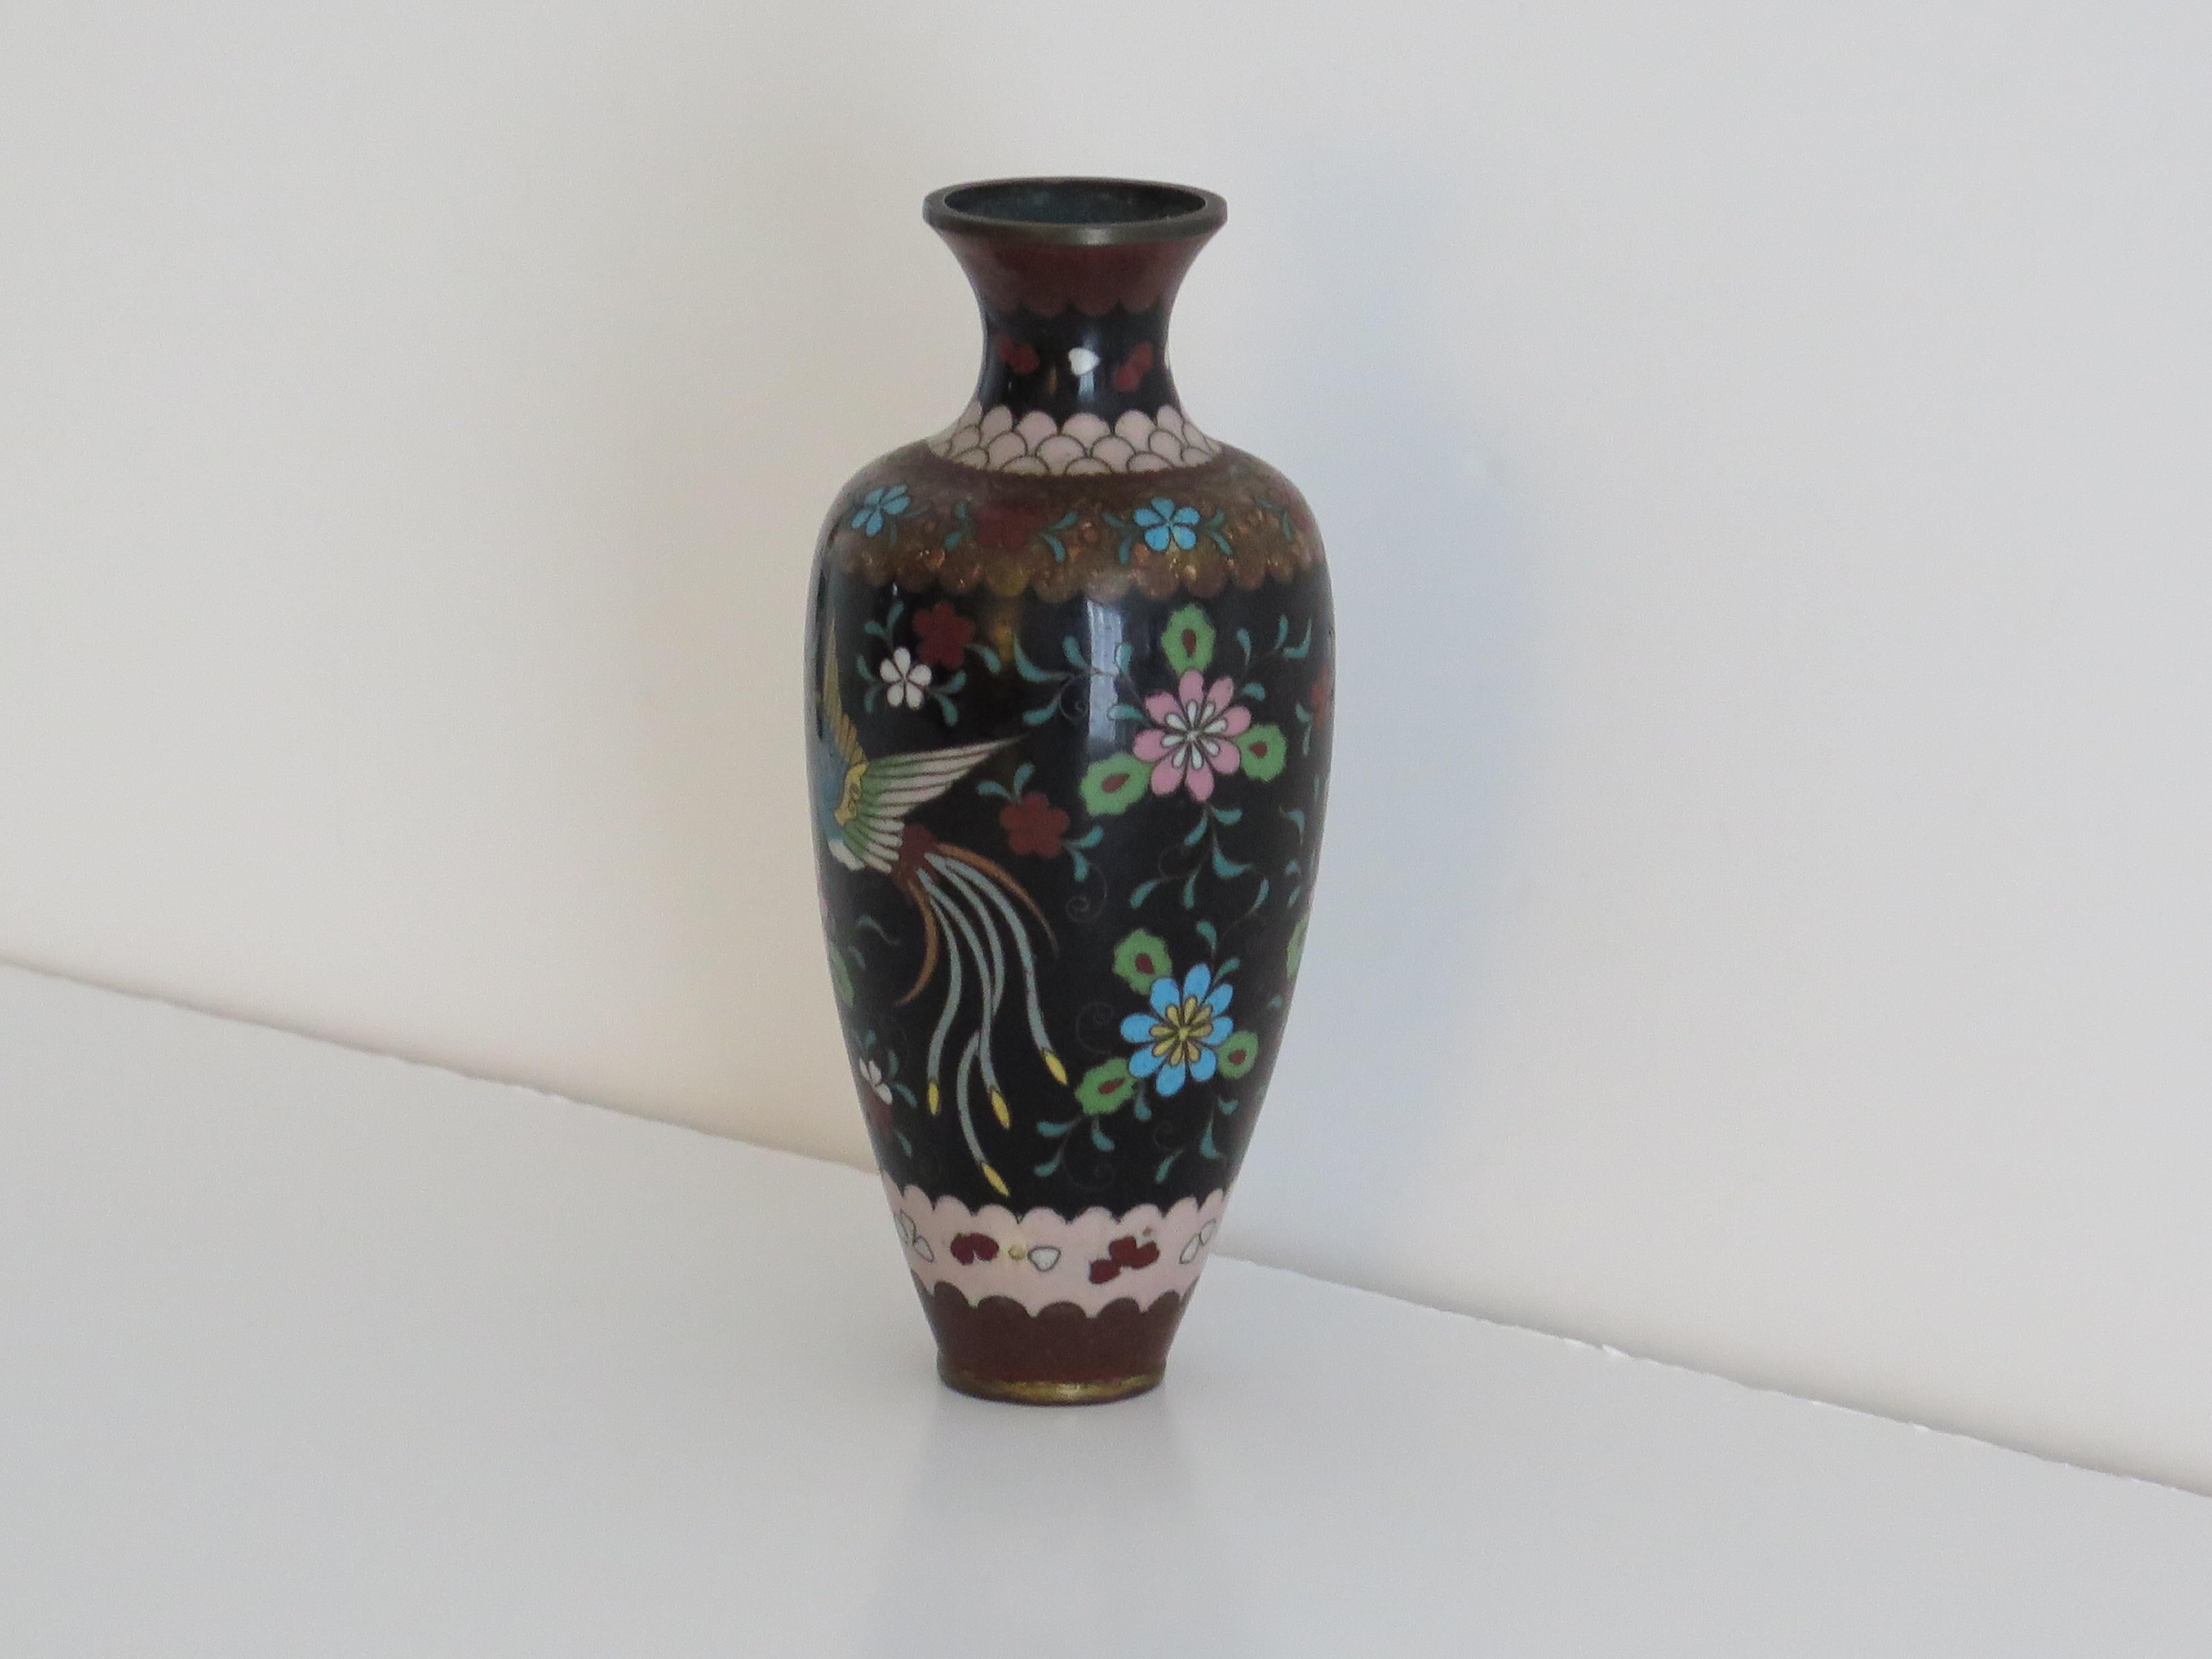 Ceramic Chinese Cloisonné Vase on Bronze with Phoenixes,  19th Century Qing period  For Sale